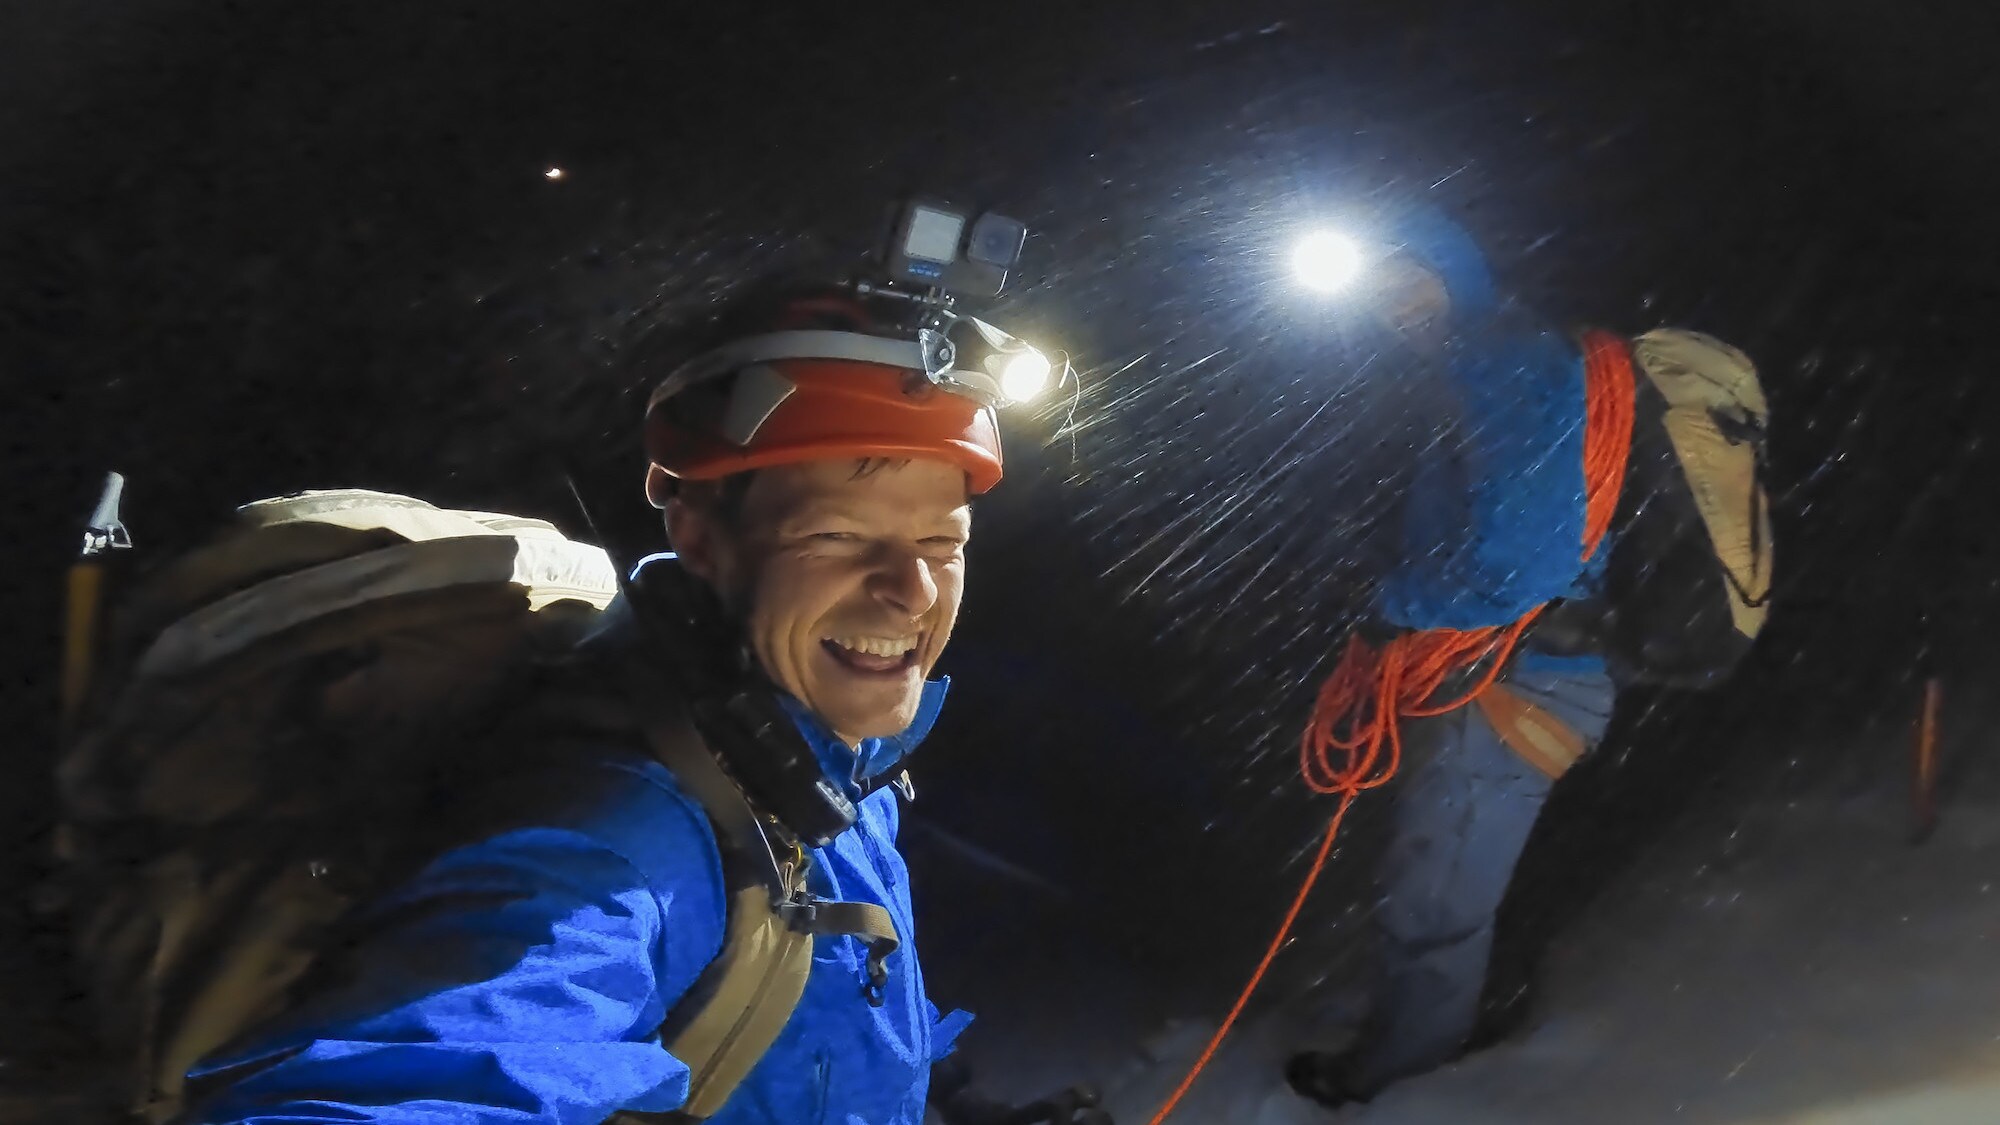 Bertie Gregory laughing at the camera during a night climb. (National Geographic for Disney+/Bertie Gregory)